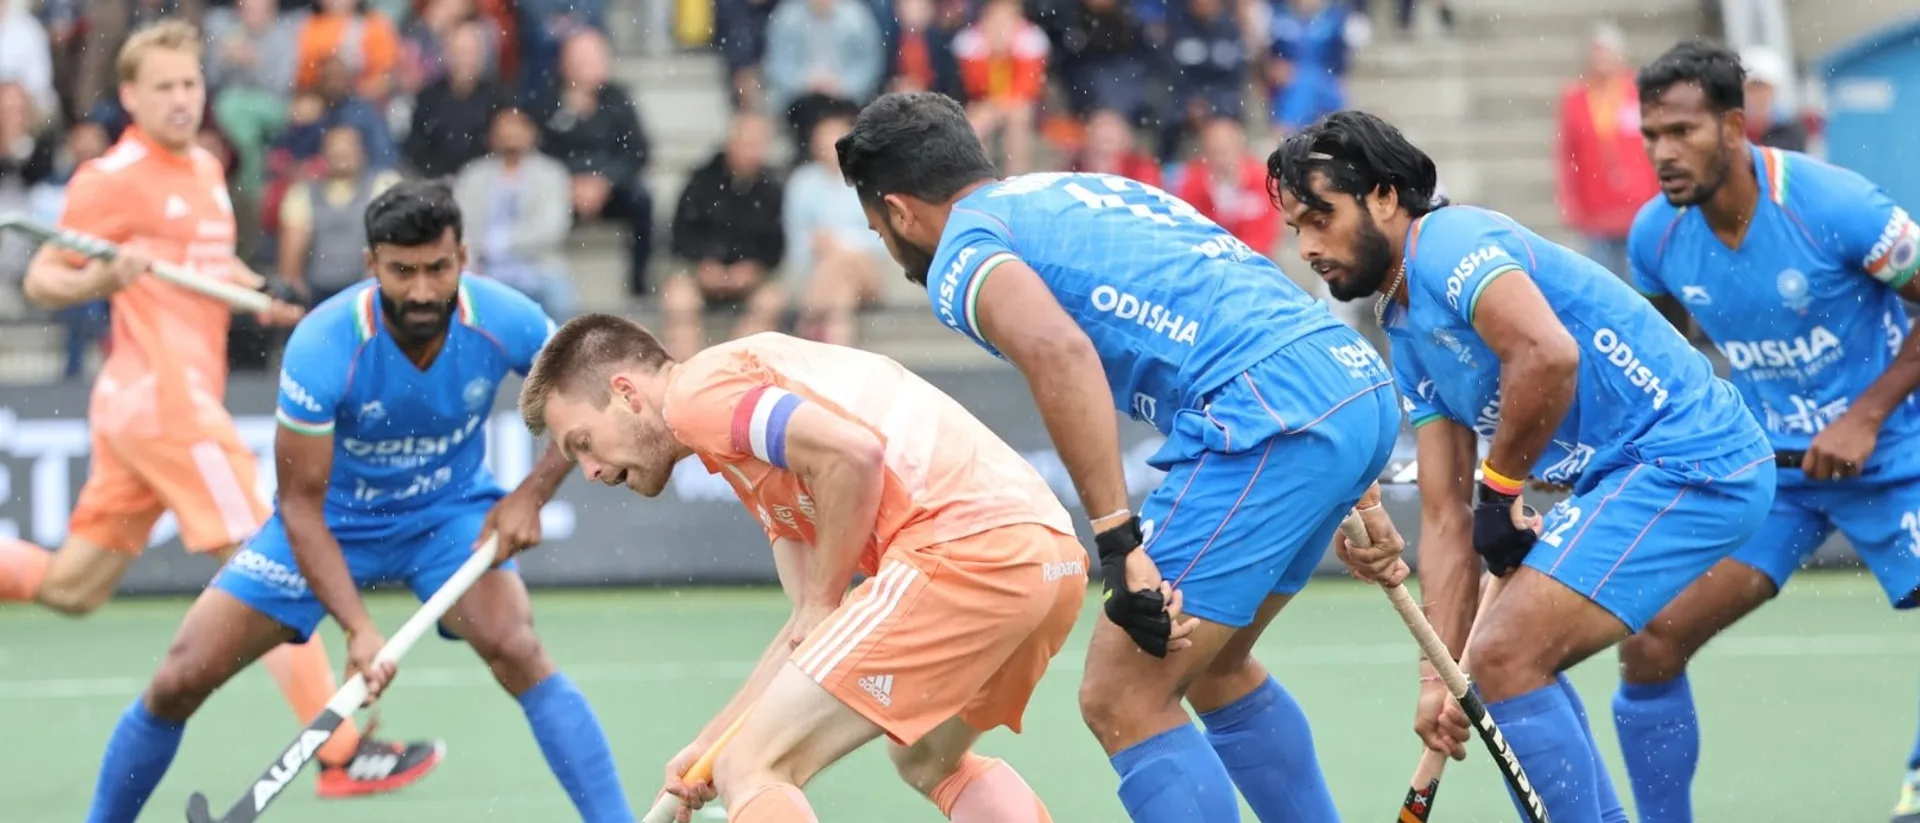 FIH Pro Hockey League | India end campaign with third-place finish after loss to the Netherlands